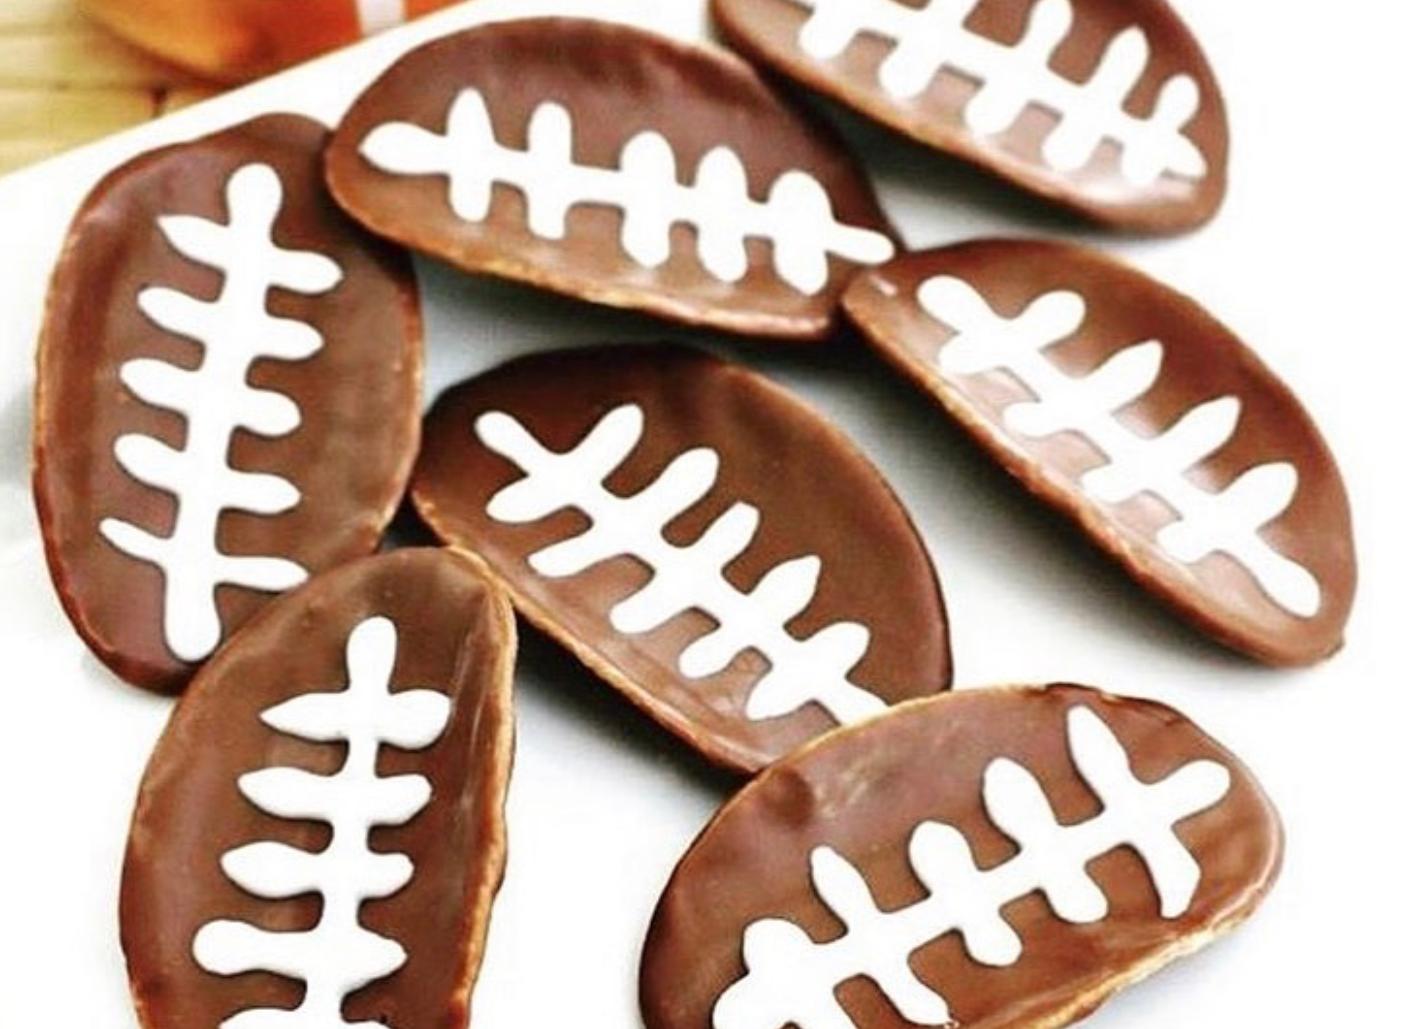 Chips covered in chocolate with white icing, making it look like a Football